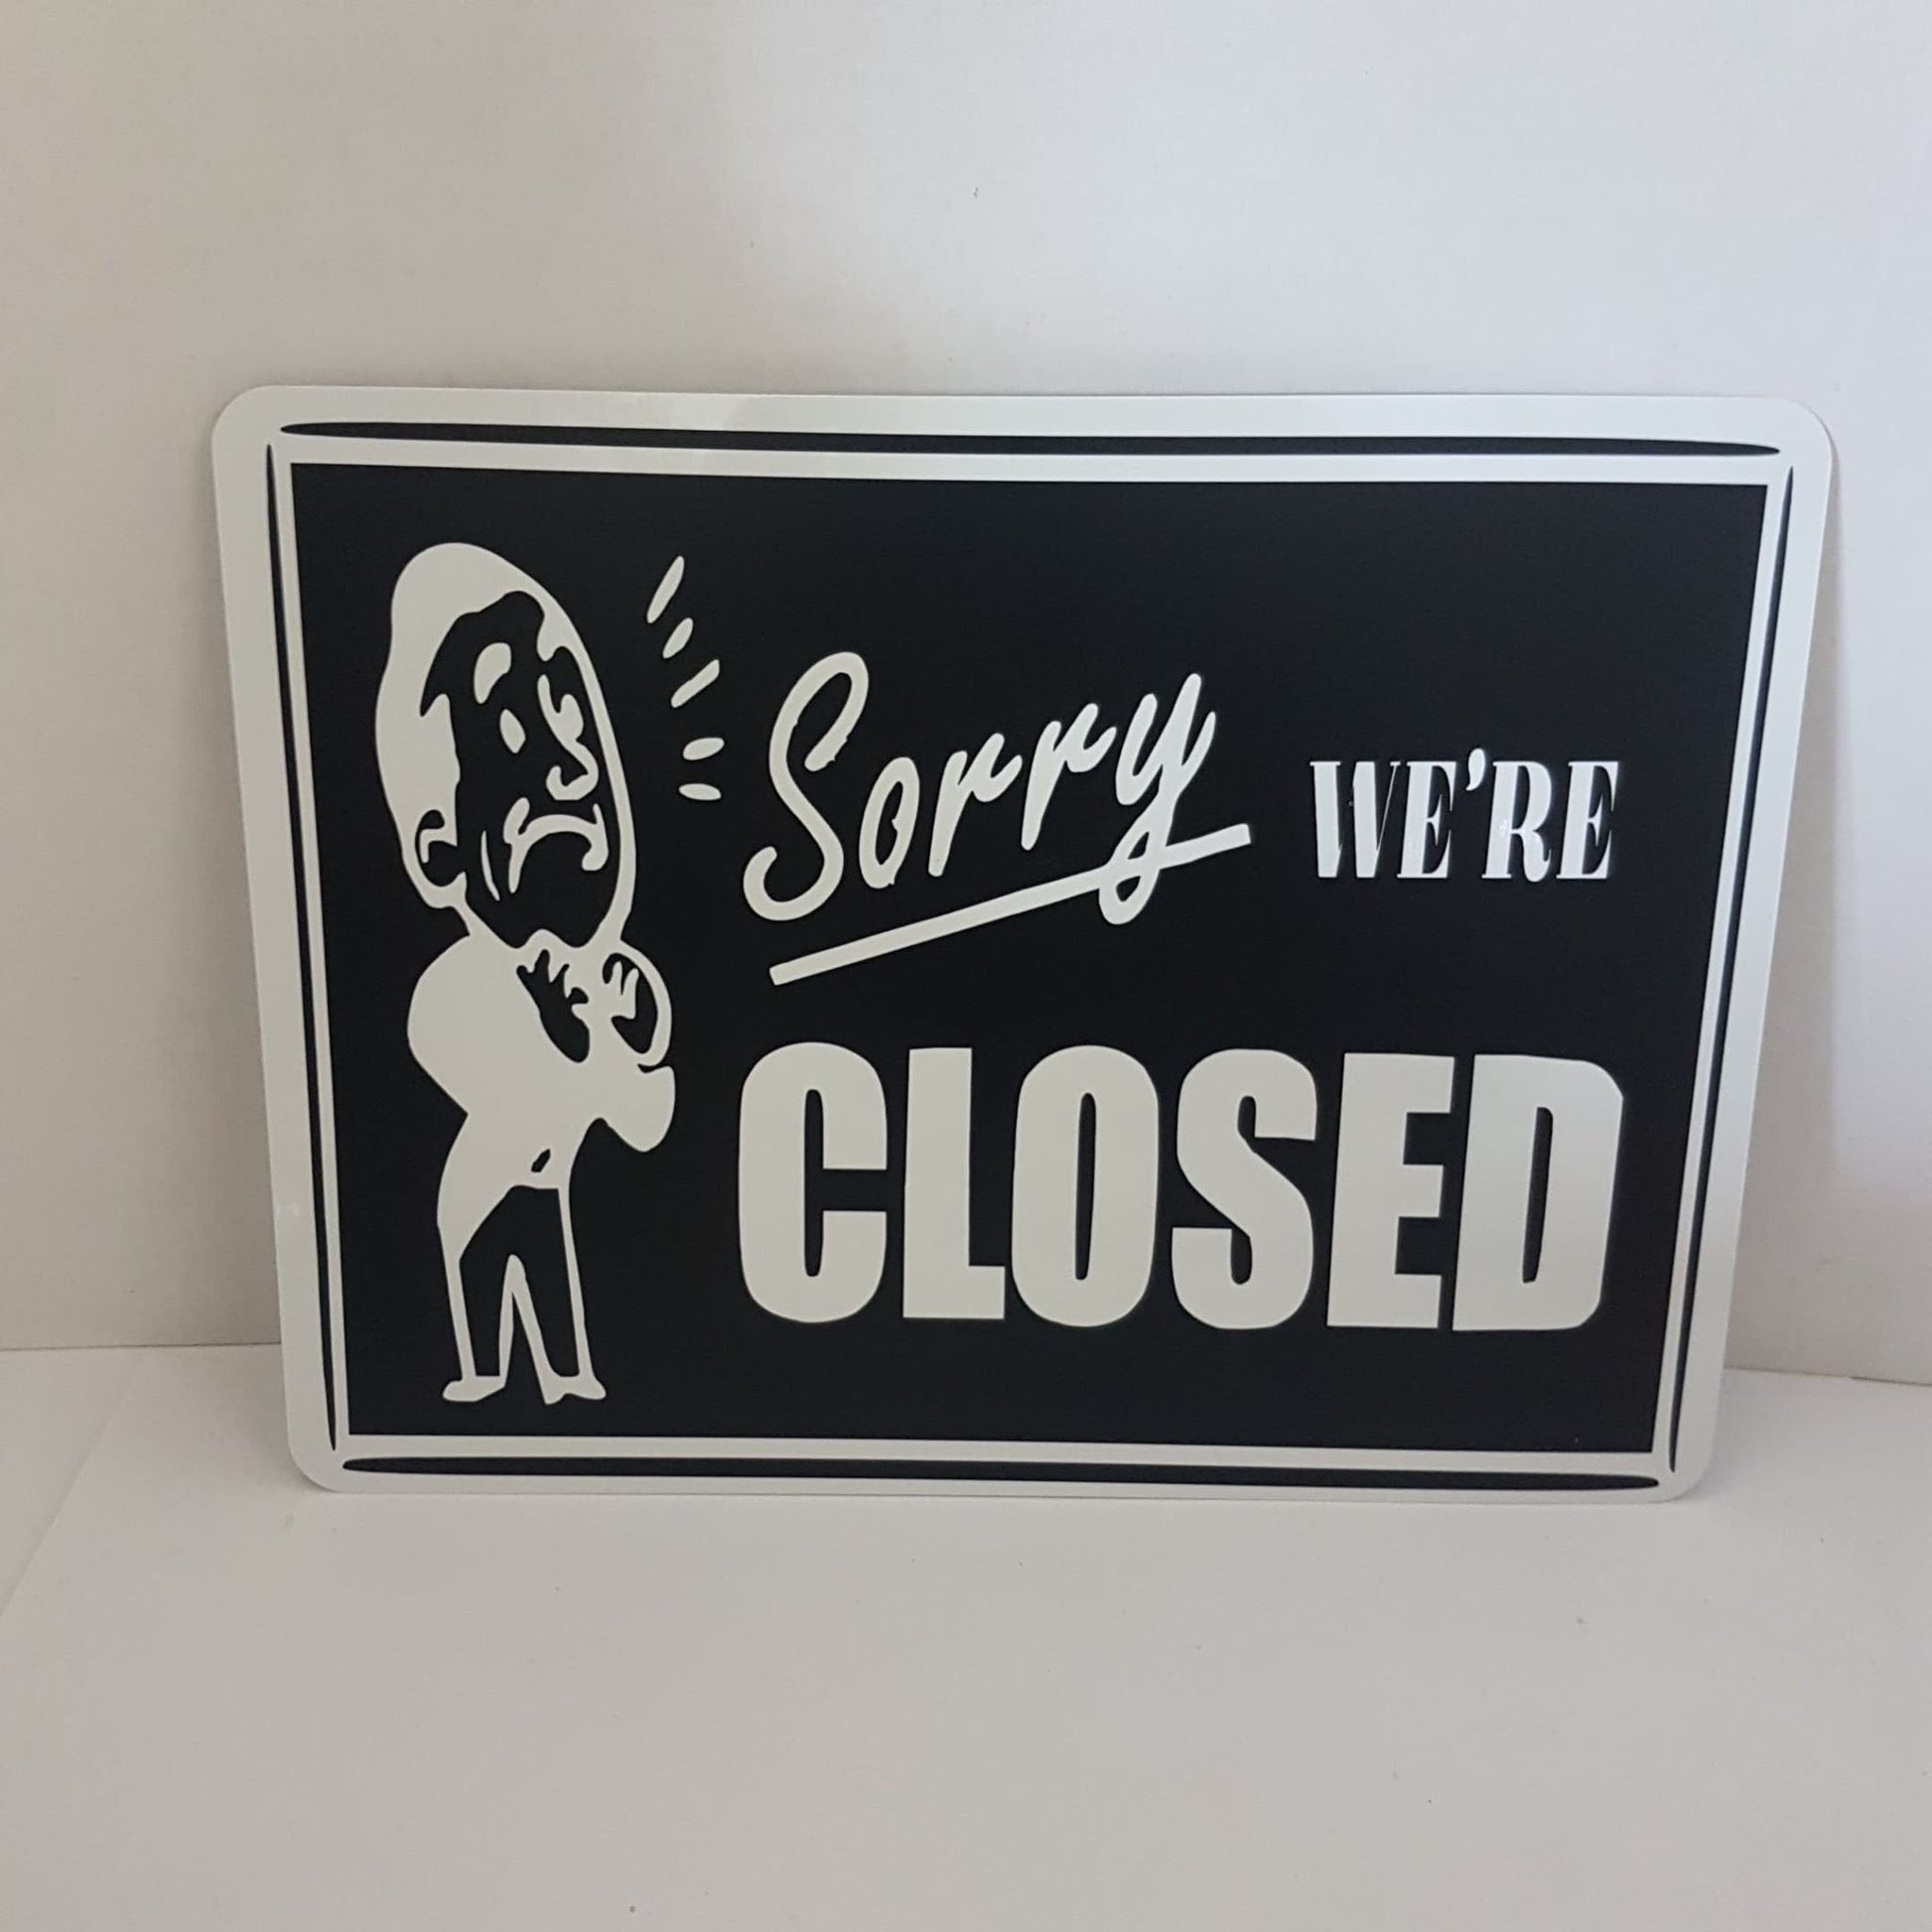 open closed signs